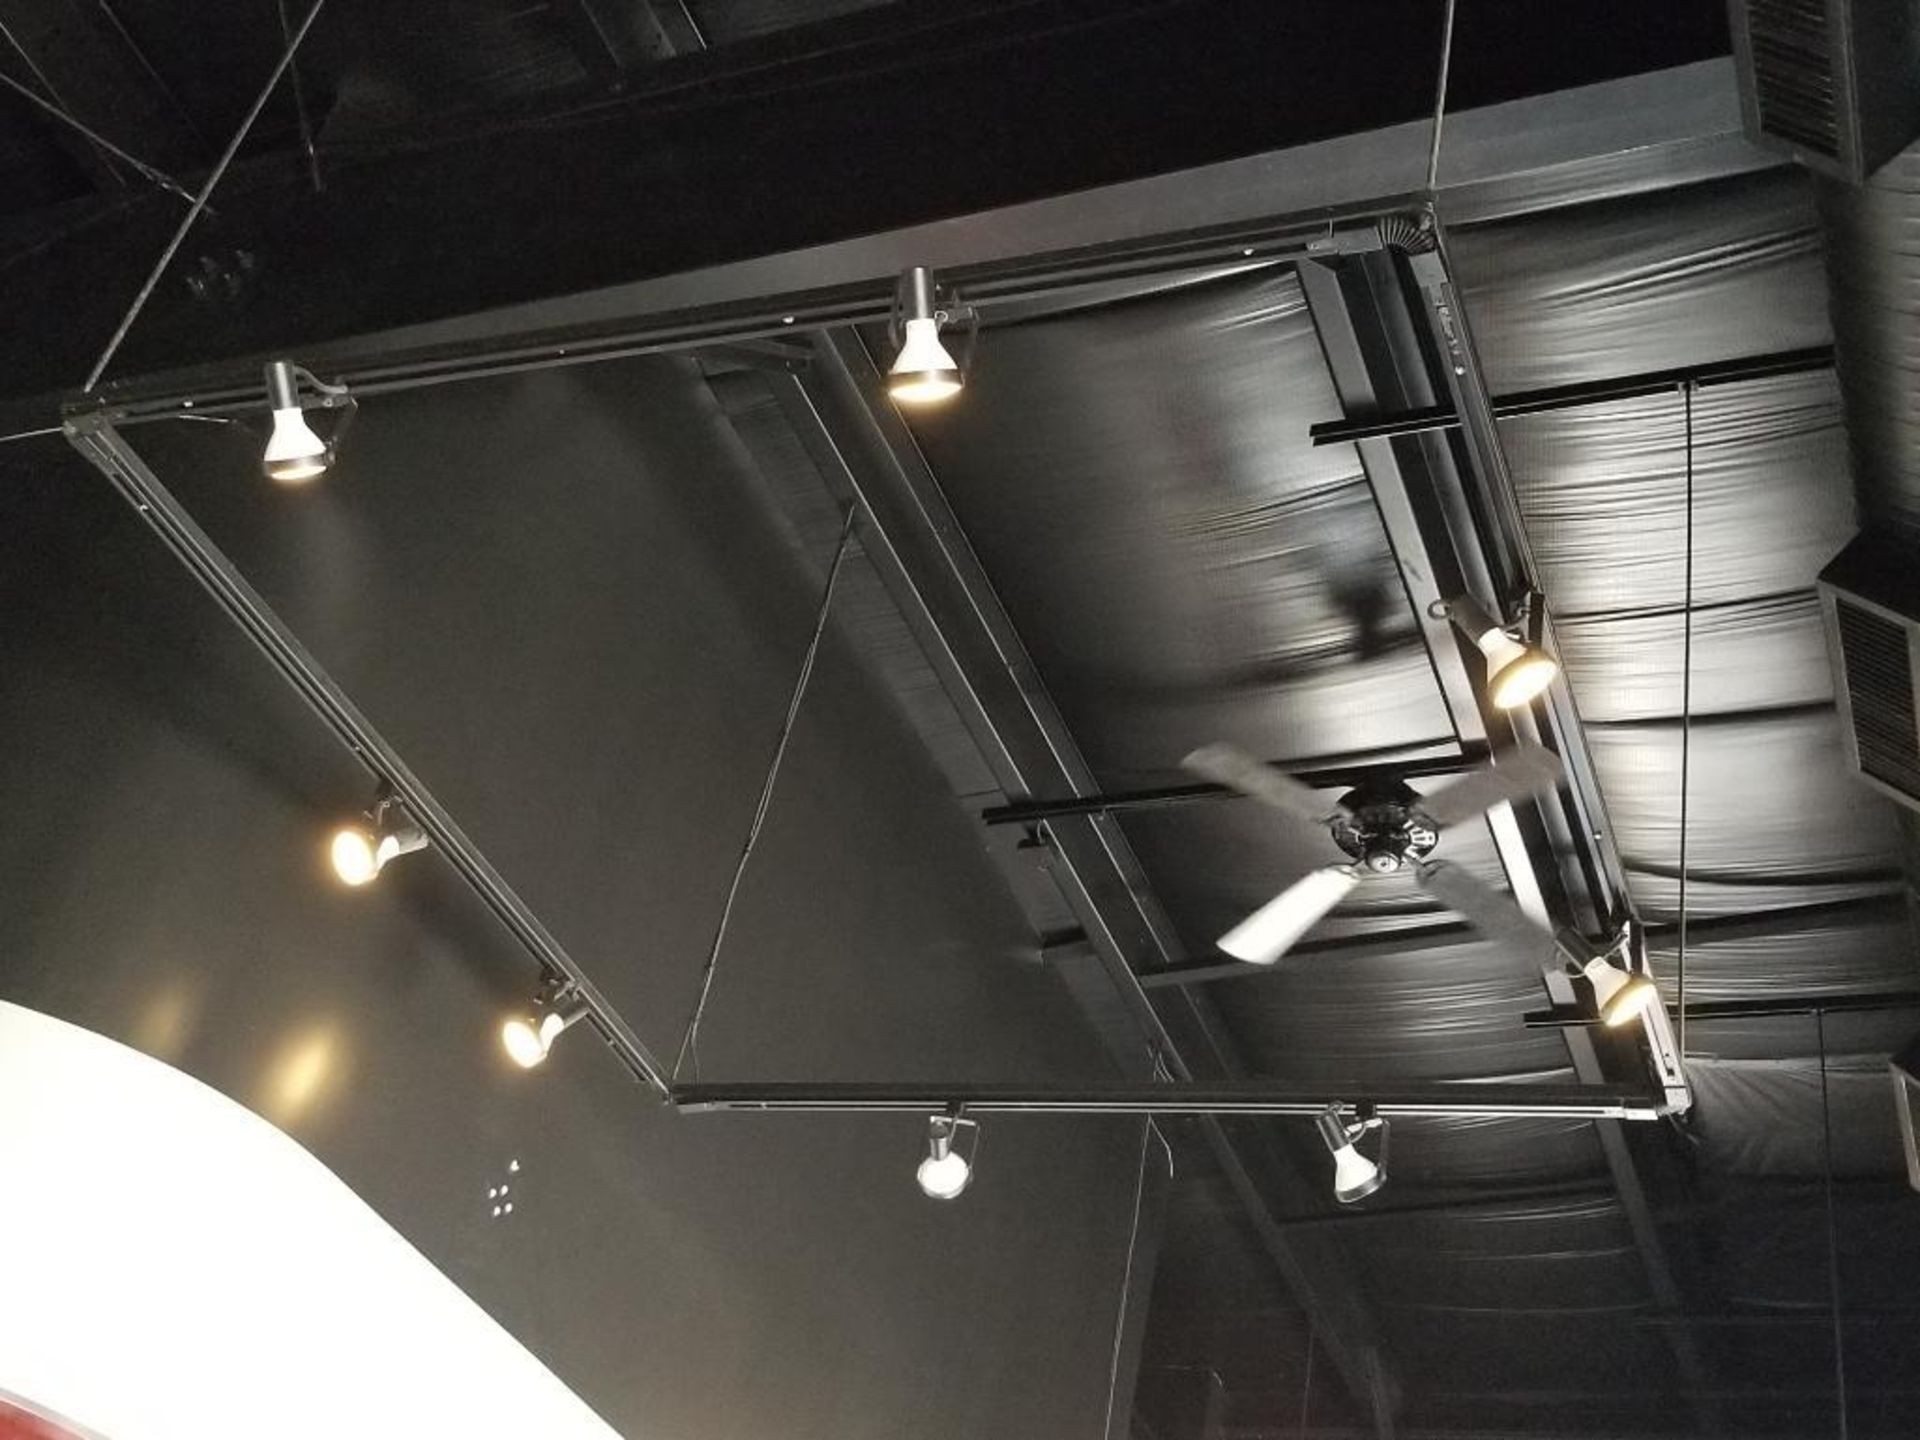 Qty 2 - Ceiling hung light fixtures. - Image 2 of 3